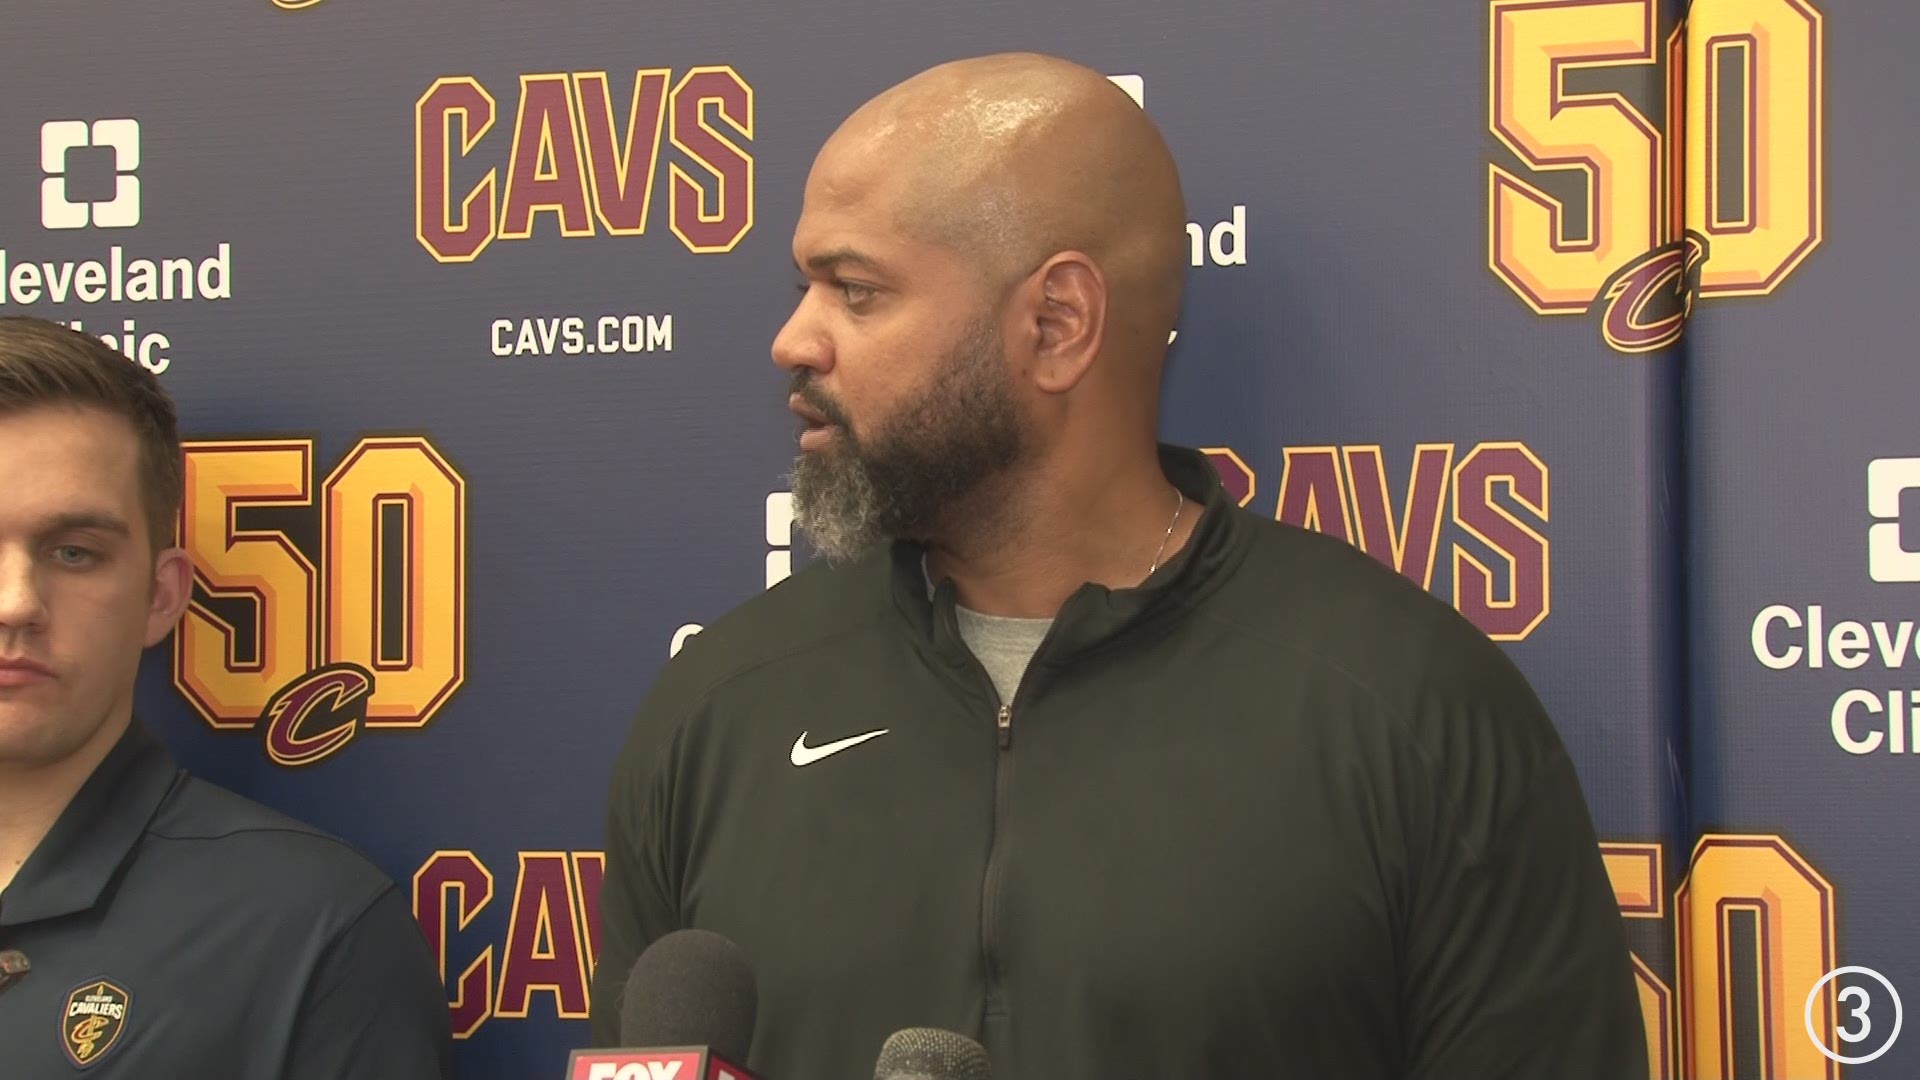 Getting to know you!  Following John Beilein's resignation, J.B. Bickerstaff will take over as the head coach of the Cleveland Cavaliers.